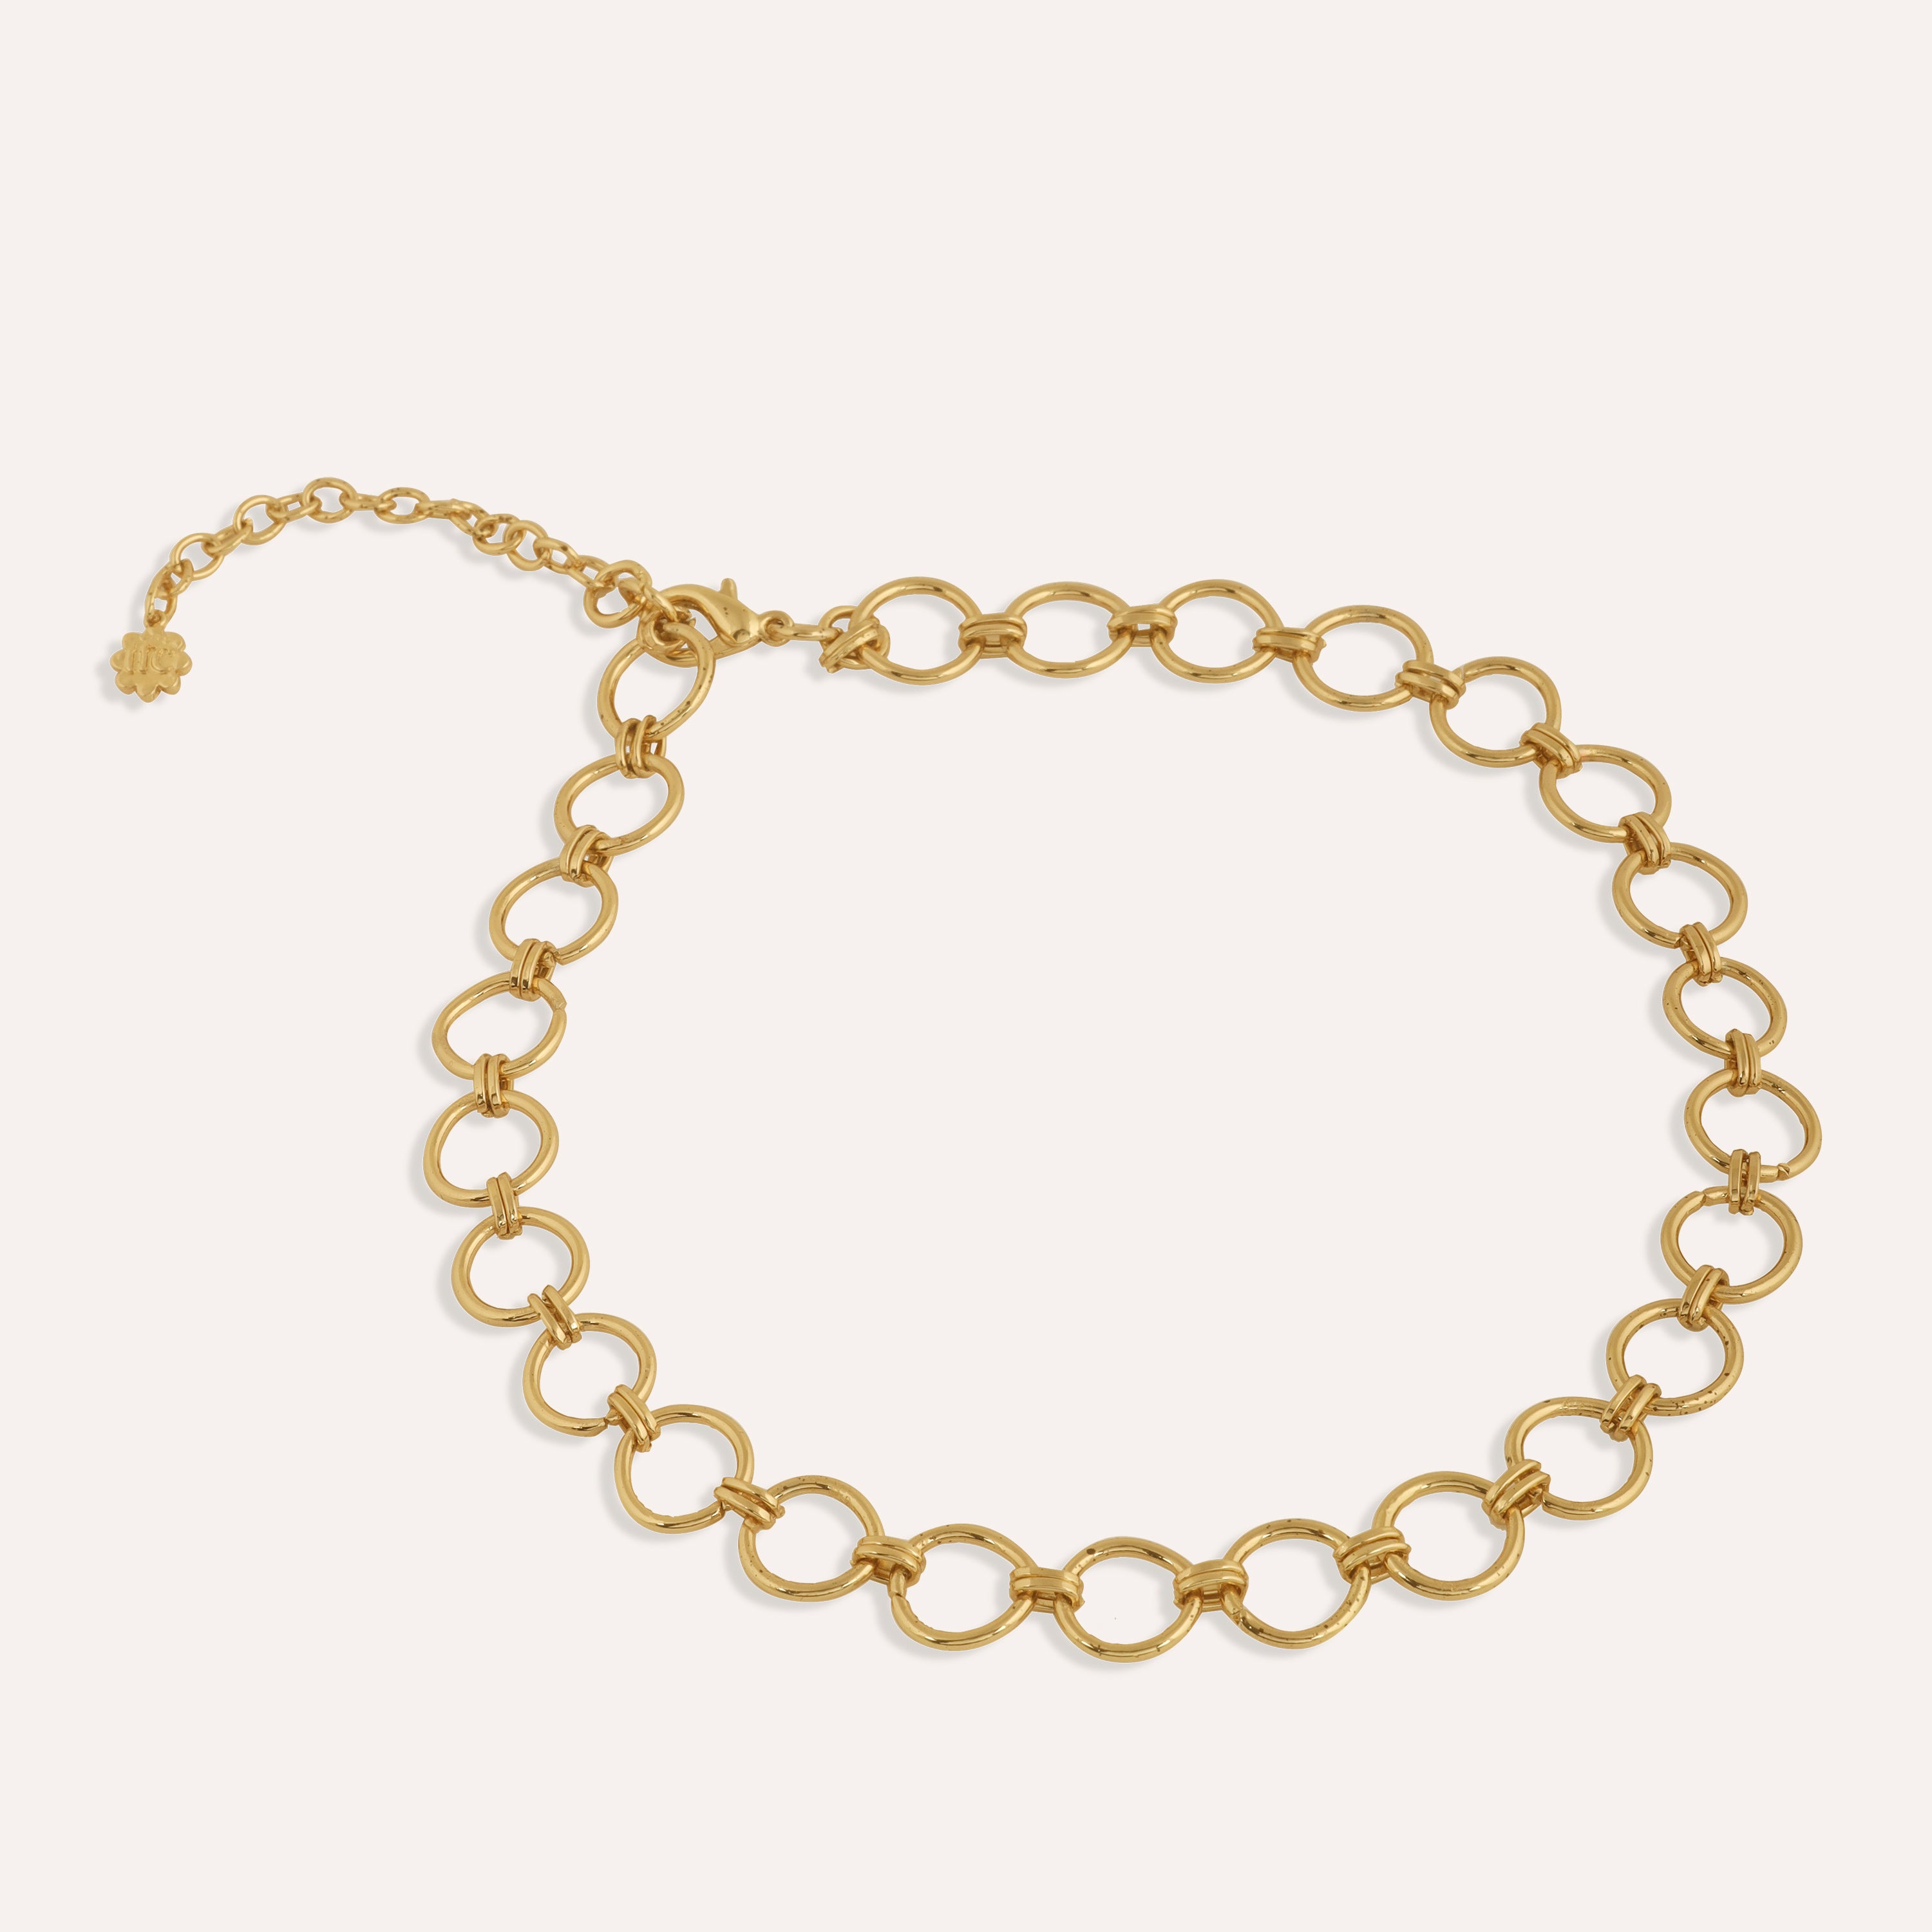 TFC Napoli Luxury Gold Plated Chain Necklace-Enhance your elegance with our collection of gold-plated necklaces for women. Choose from stunning pendant necklaces, chic choker necklaces, and trendy layered necklaces. Our sleek and dainty designs are both affordable and anti-tarnish, ensuring lasting beauty. Enjoy the cheapest fashion jewellery, lightweight and stylish- only at The Fun Company